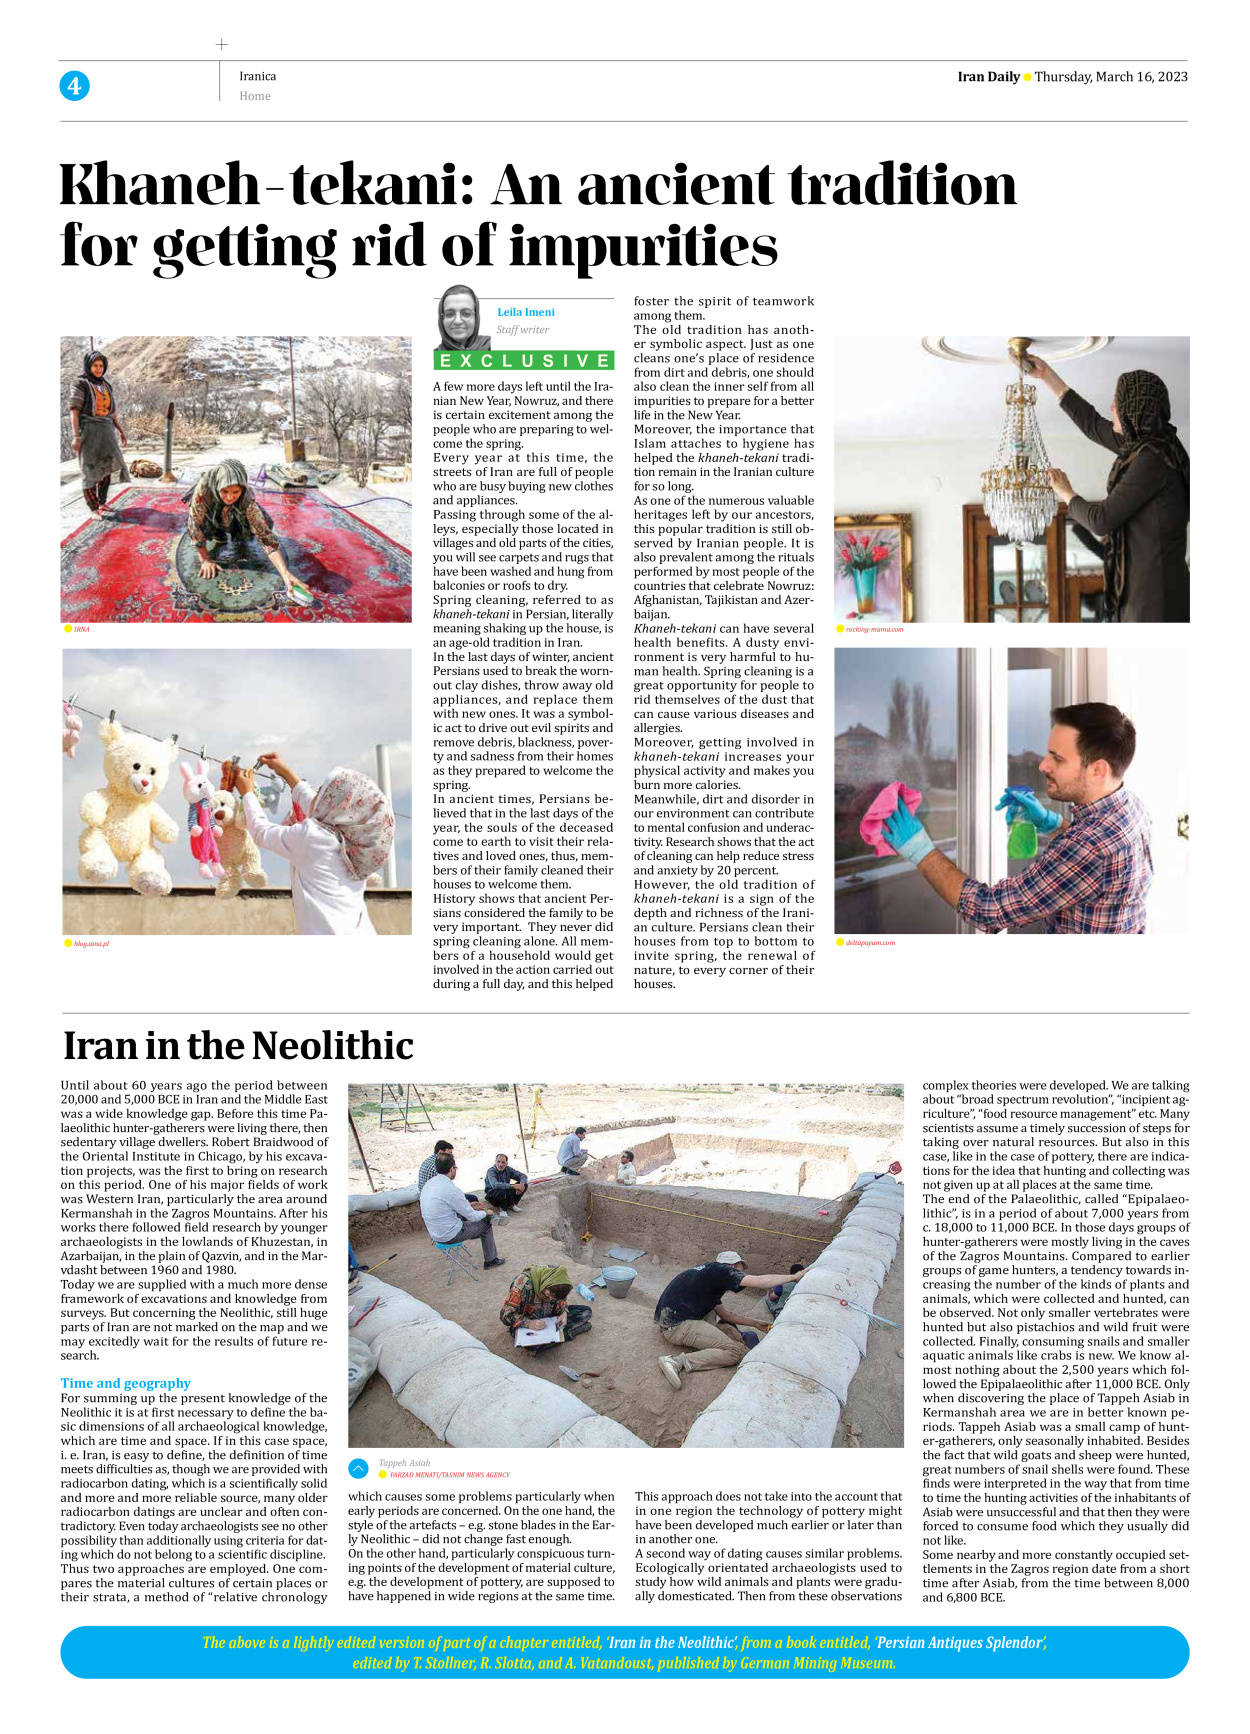 Iran Daily - Number Seven Thousand Two Hundred and Fifty Nine - 16 March 2023 - Page 4